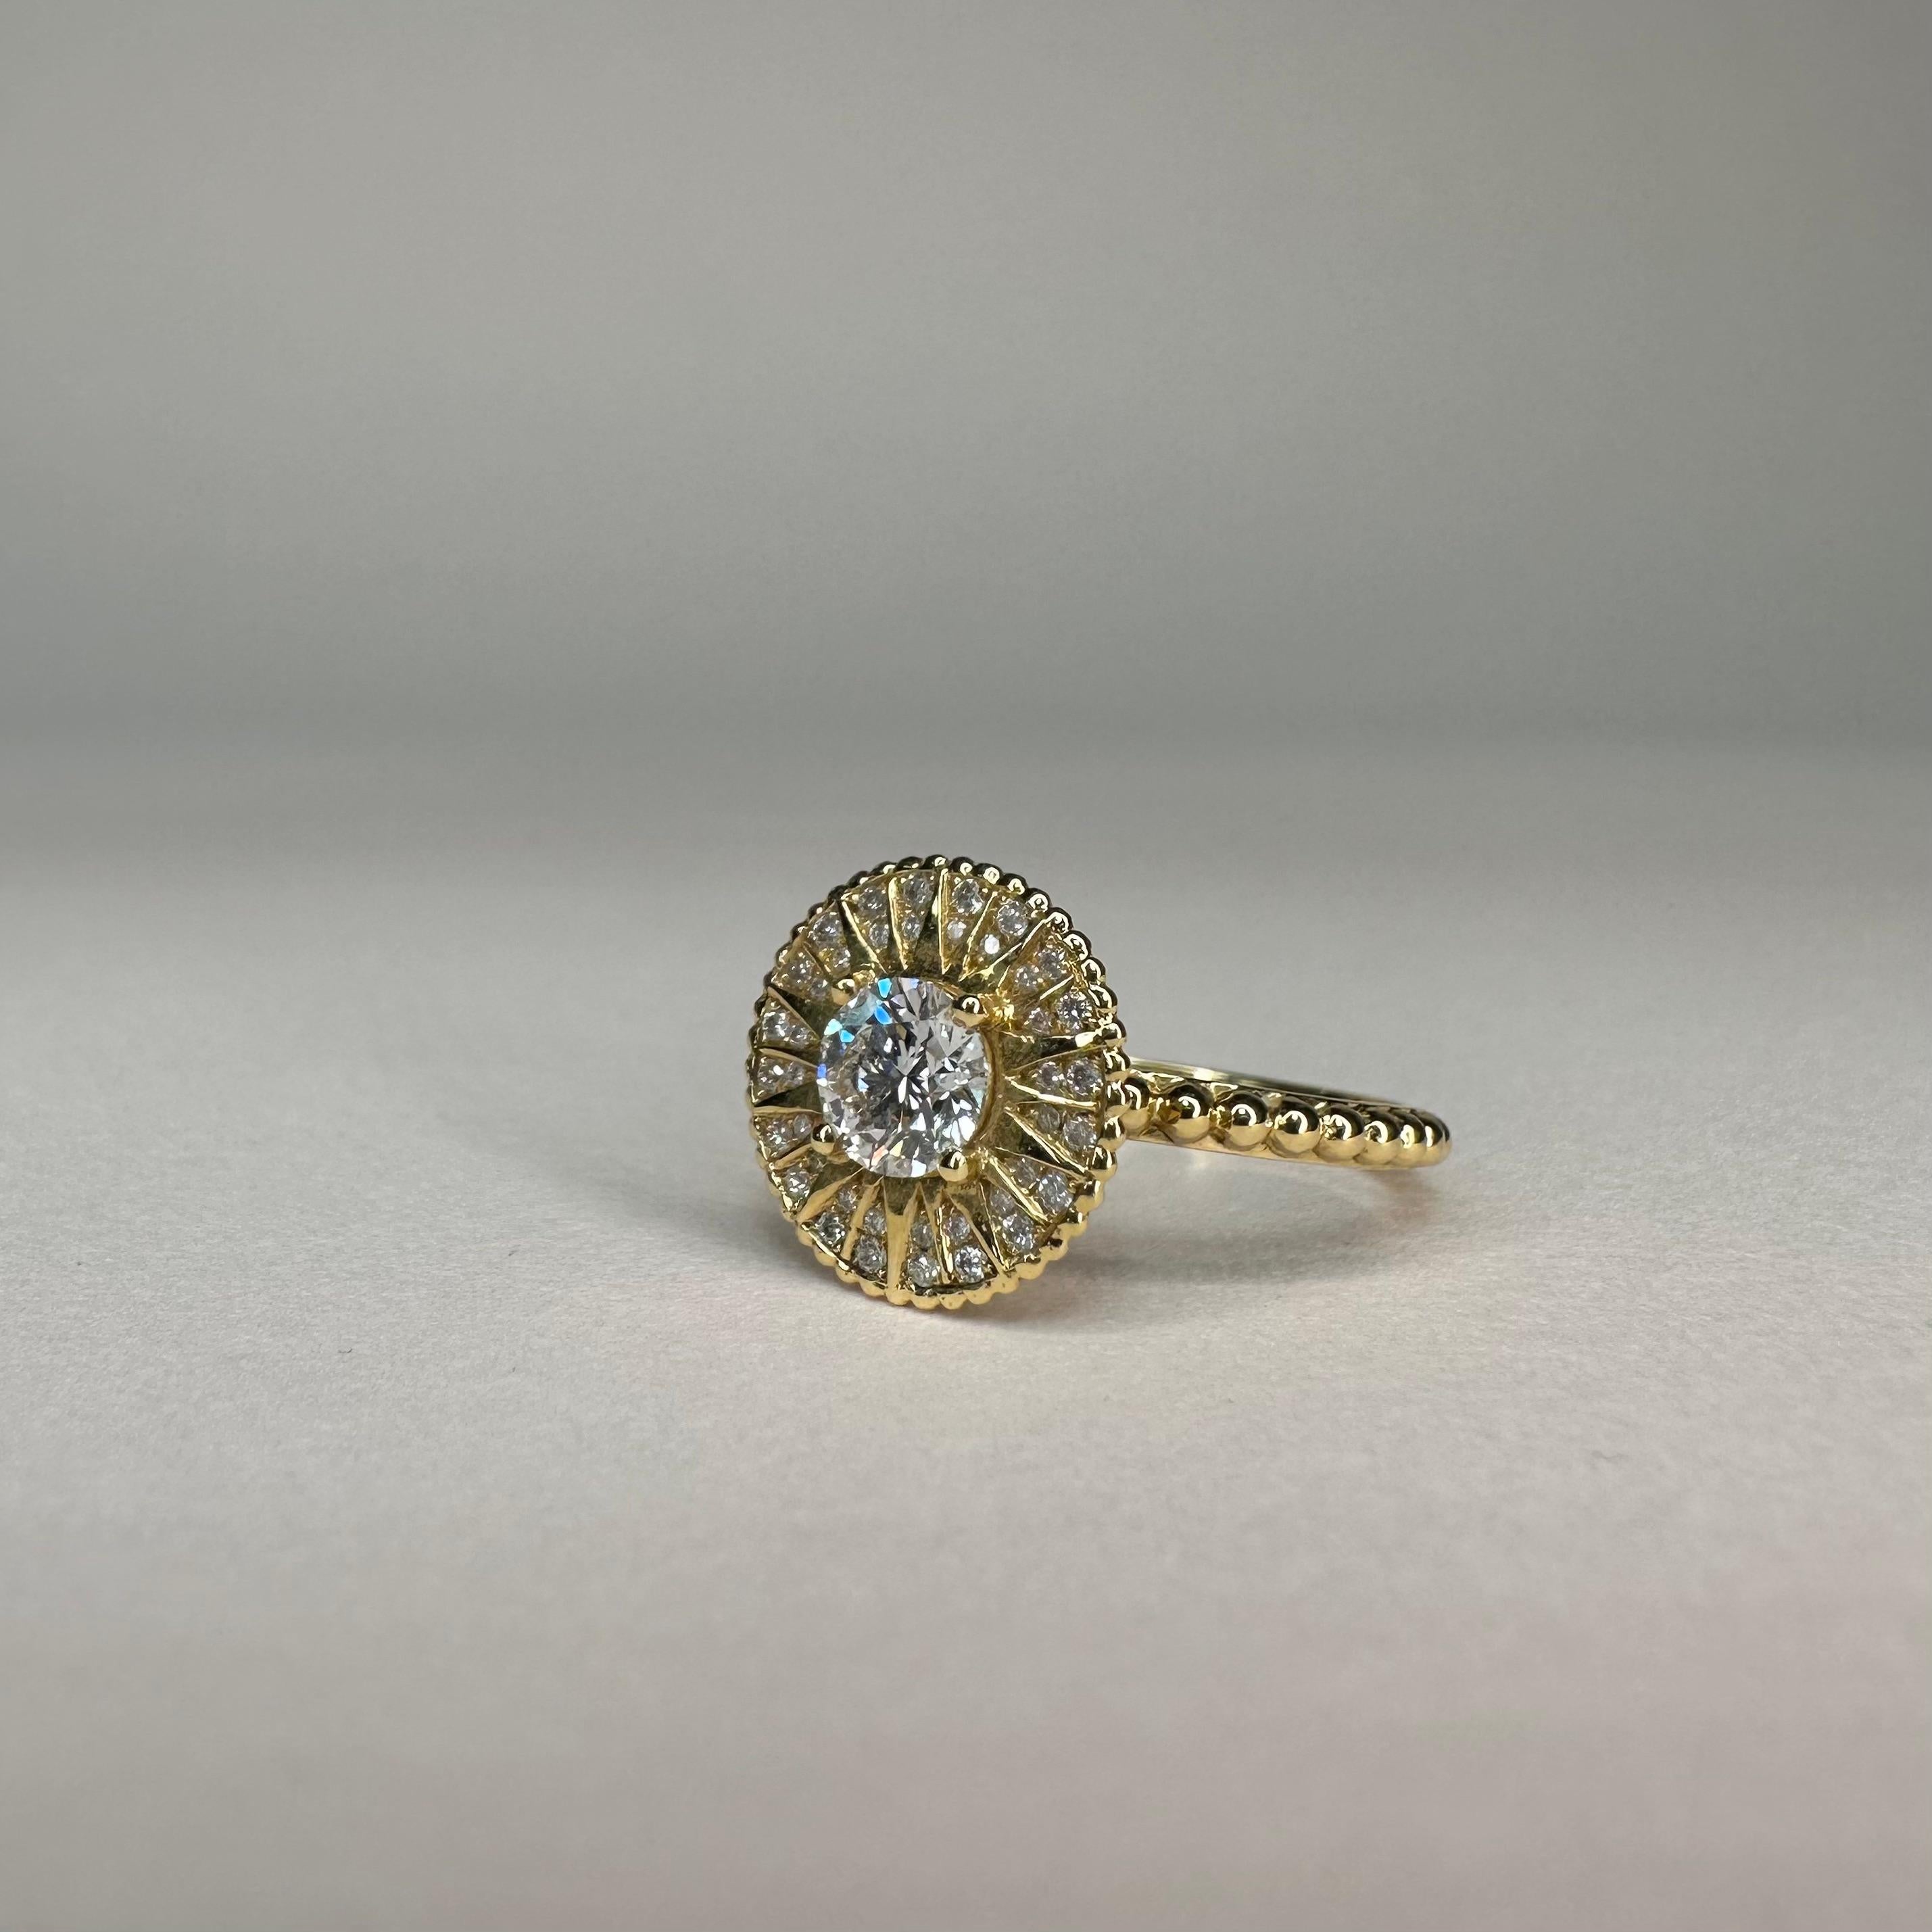 For Sale:  18k Yellow Gold Roi Soleil 0.50 Ct Diamond Ring set with 0.16 Cts of Diamonds 4